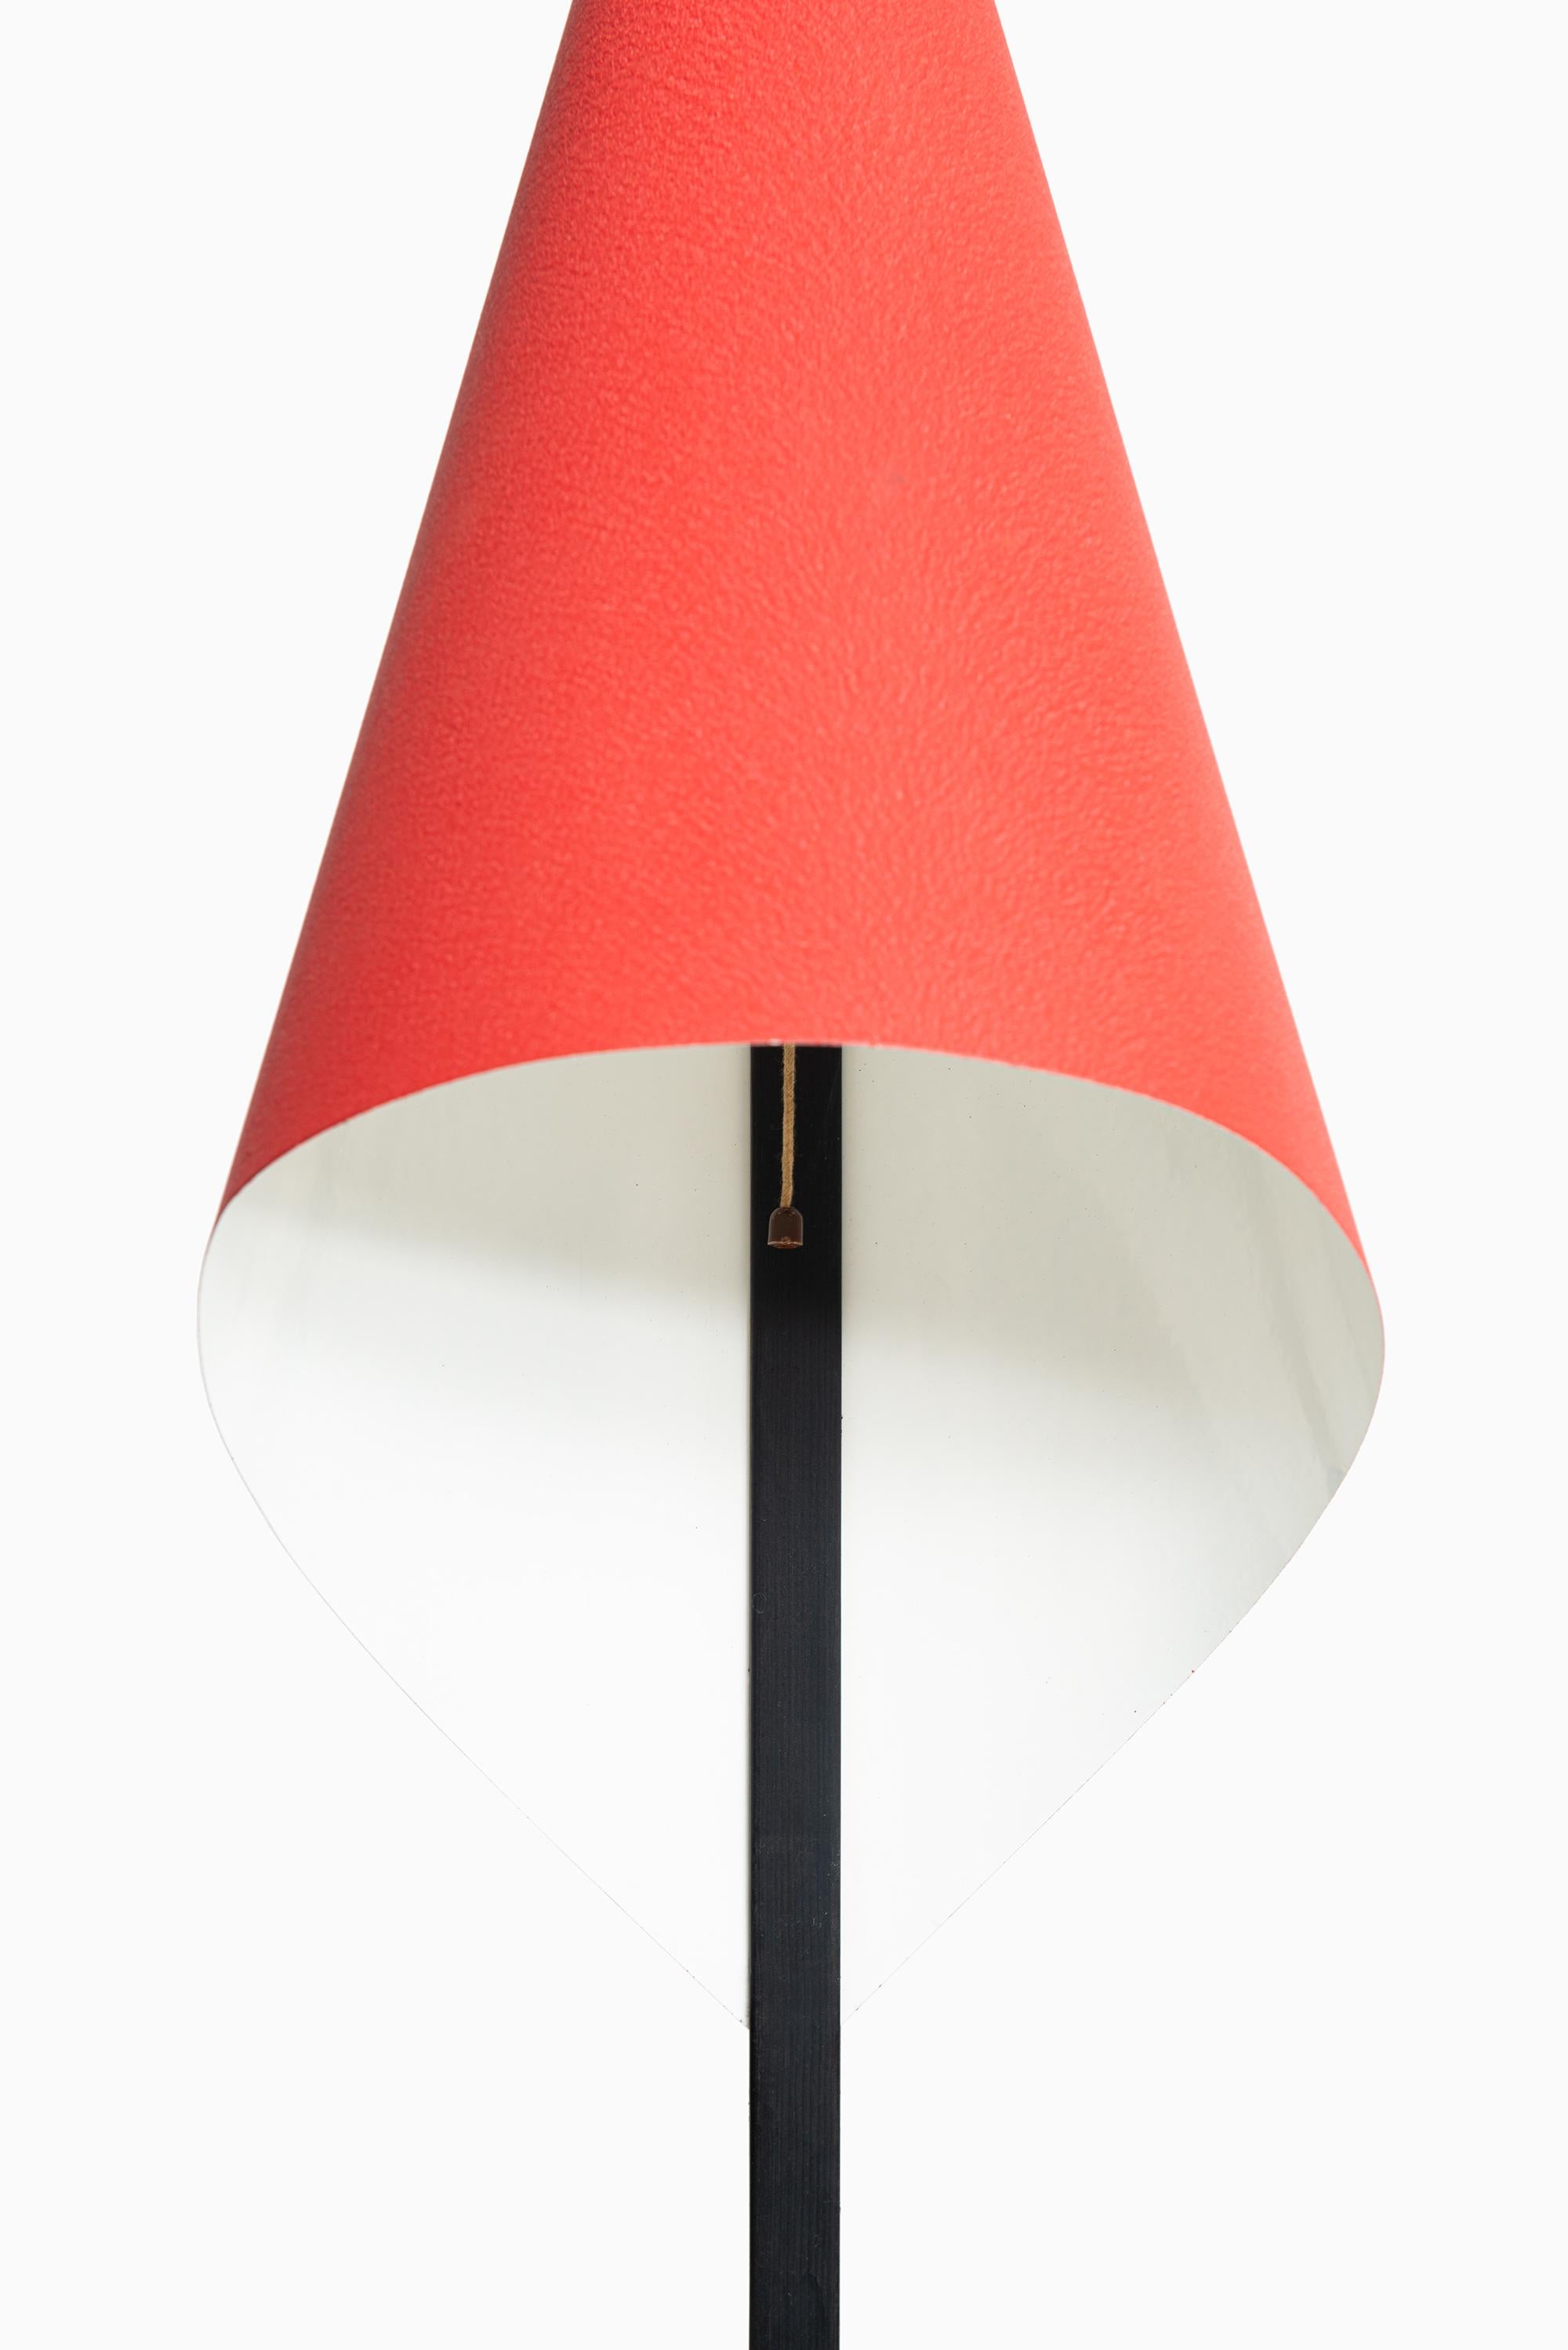 Scandinavian Modern Tall Table Lamp by Unknown Designer Produced in Sweden For Sale